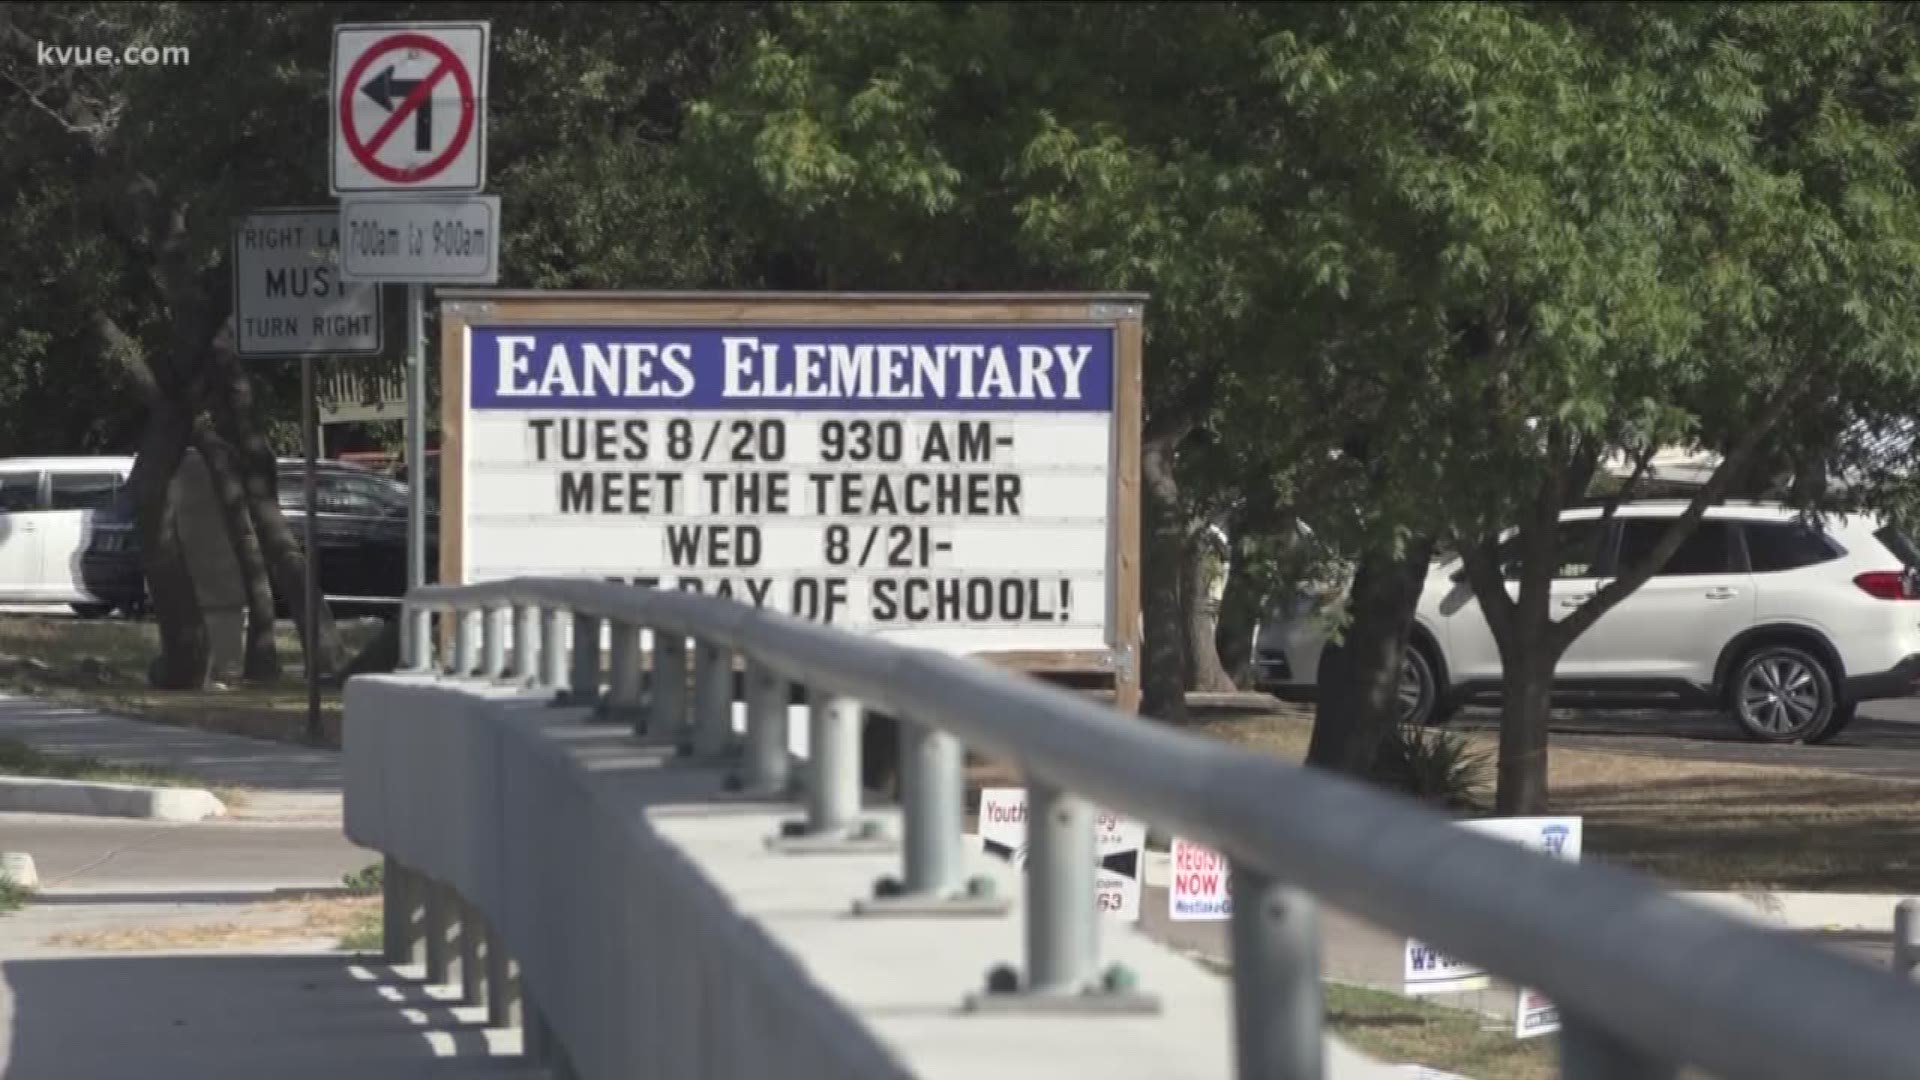 It happened at Eanes Elementary last year - now the program that allows kids to use iPads is tightening up.